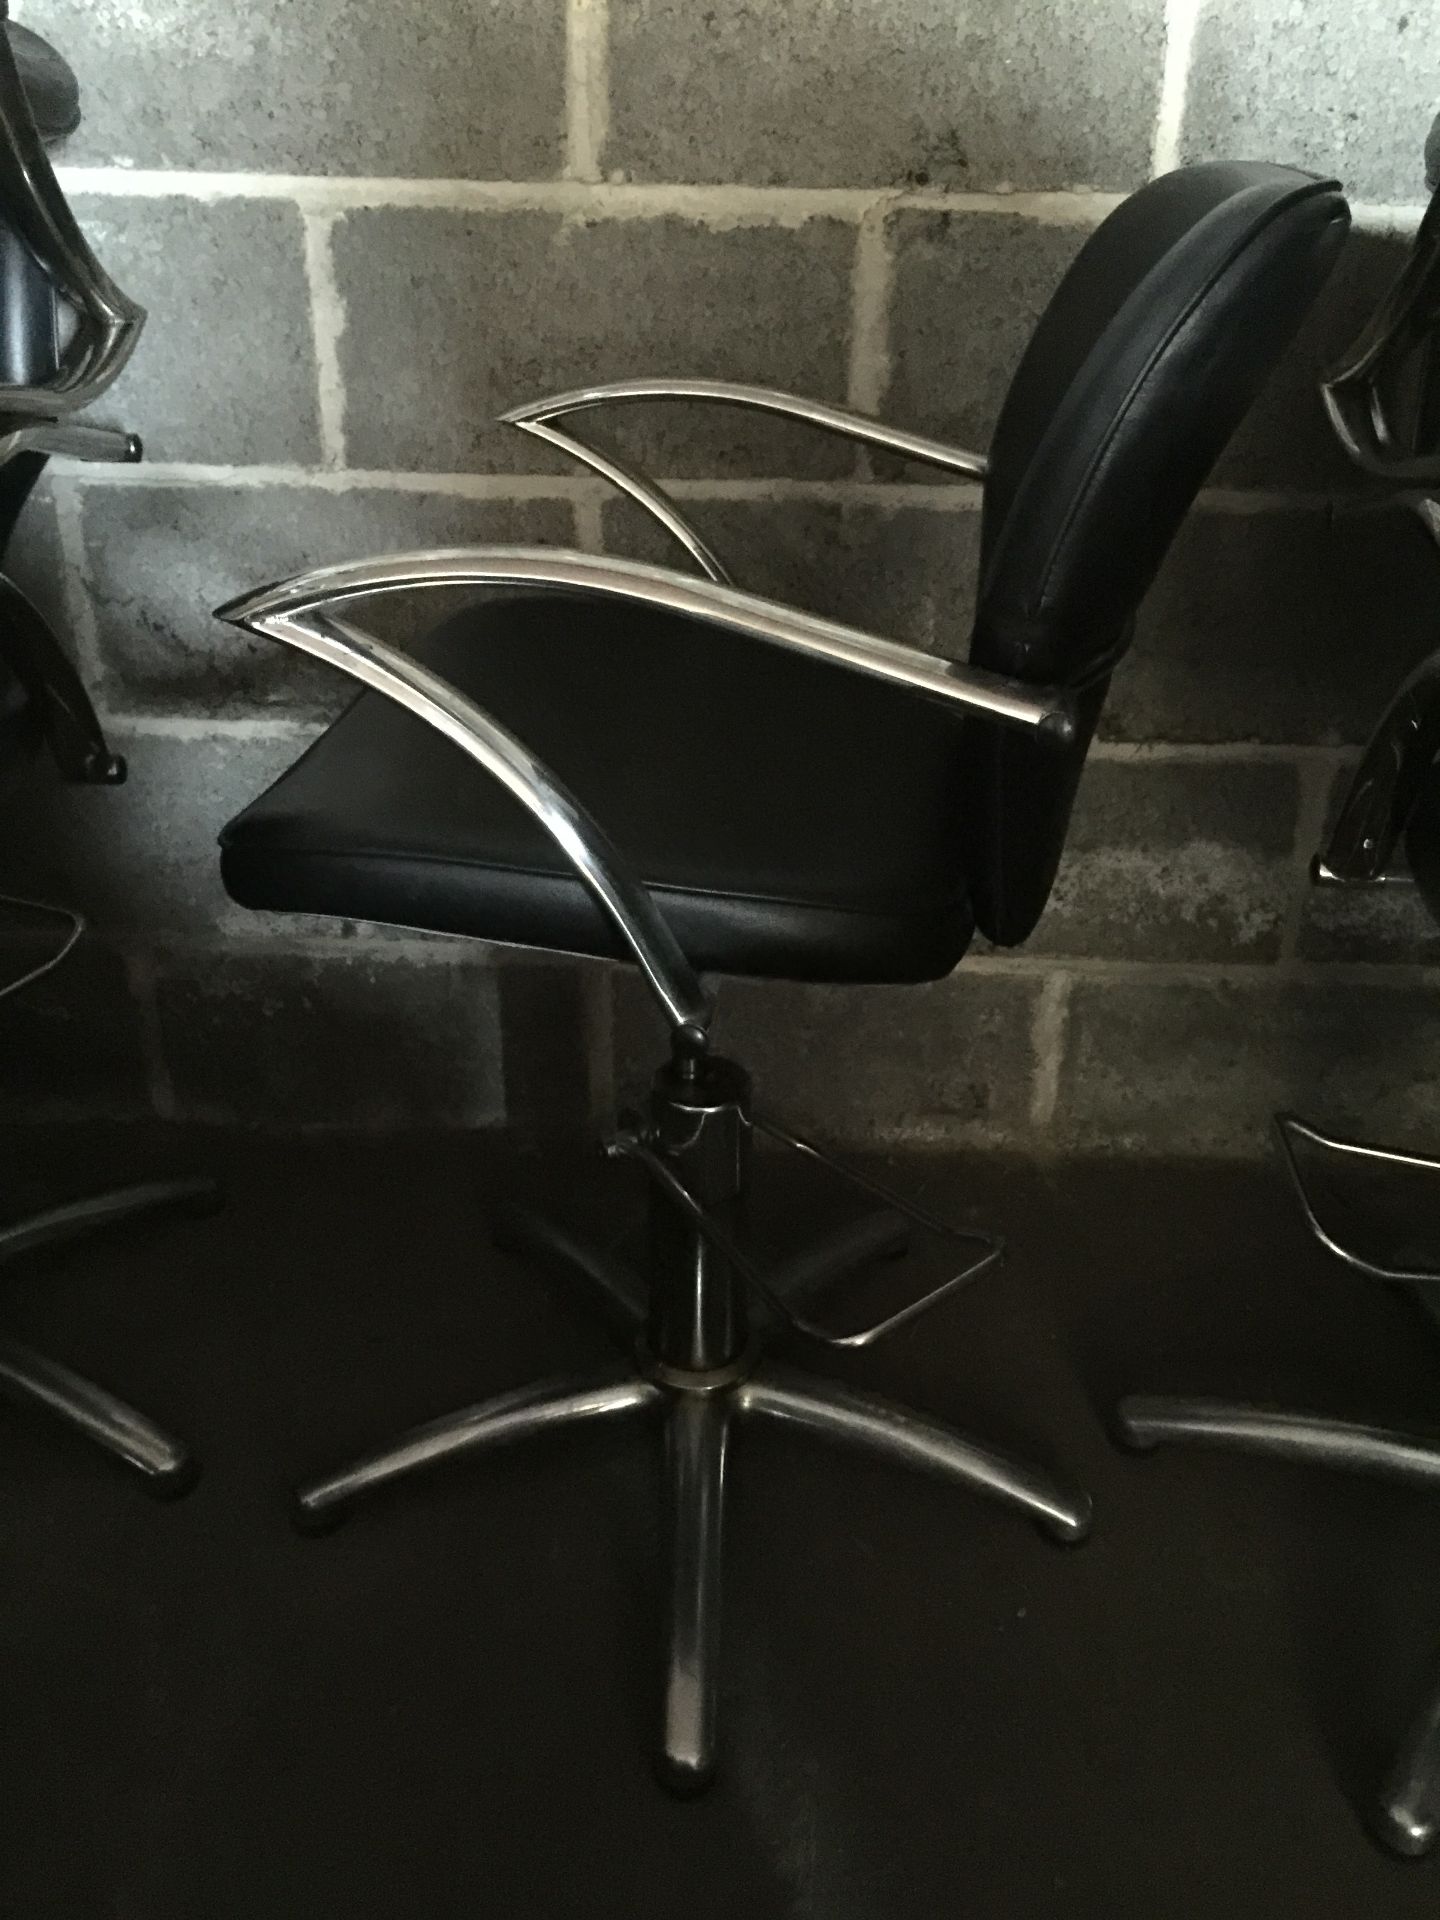 Salon Chair - Adustable height.  Black and Chrome.  Good condition, but in need of a clean. - Image 3 of 4